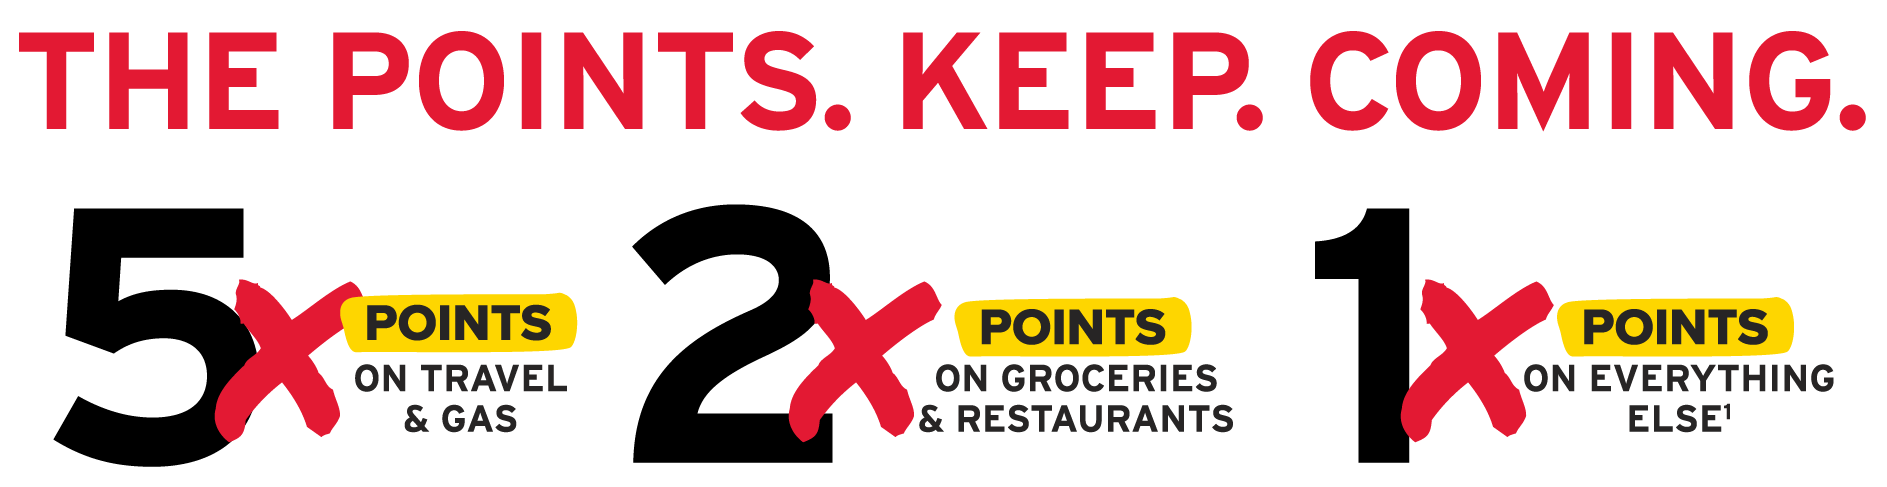 Earn 5X points on travel and gas, 2X points on groceries & restaurants, 1X points on everything else